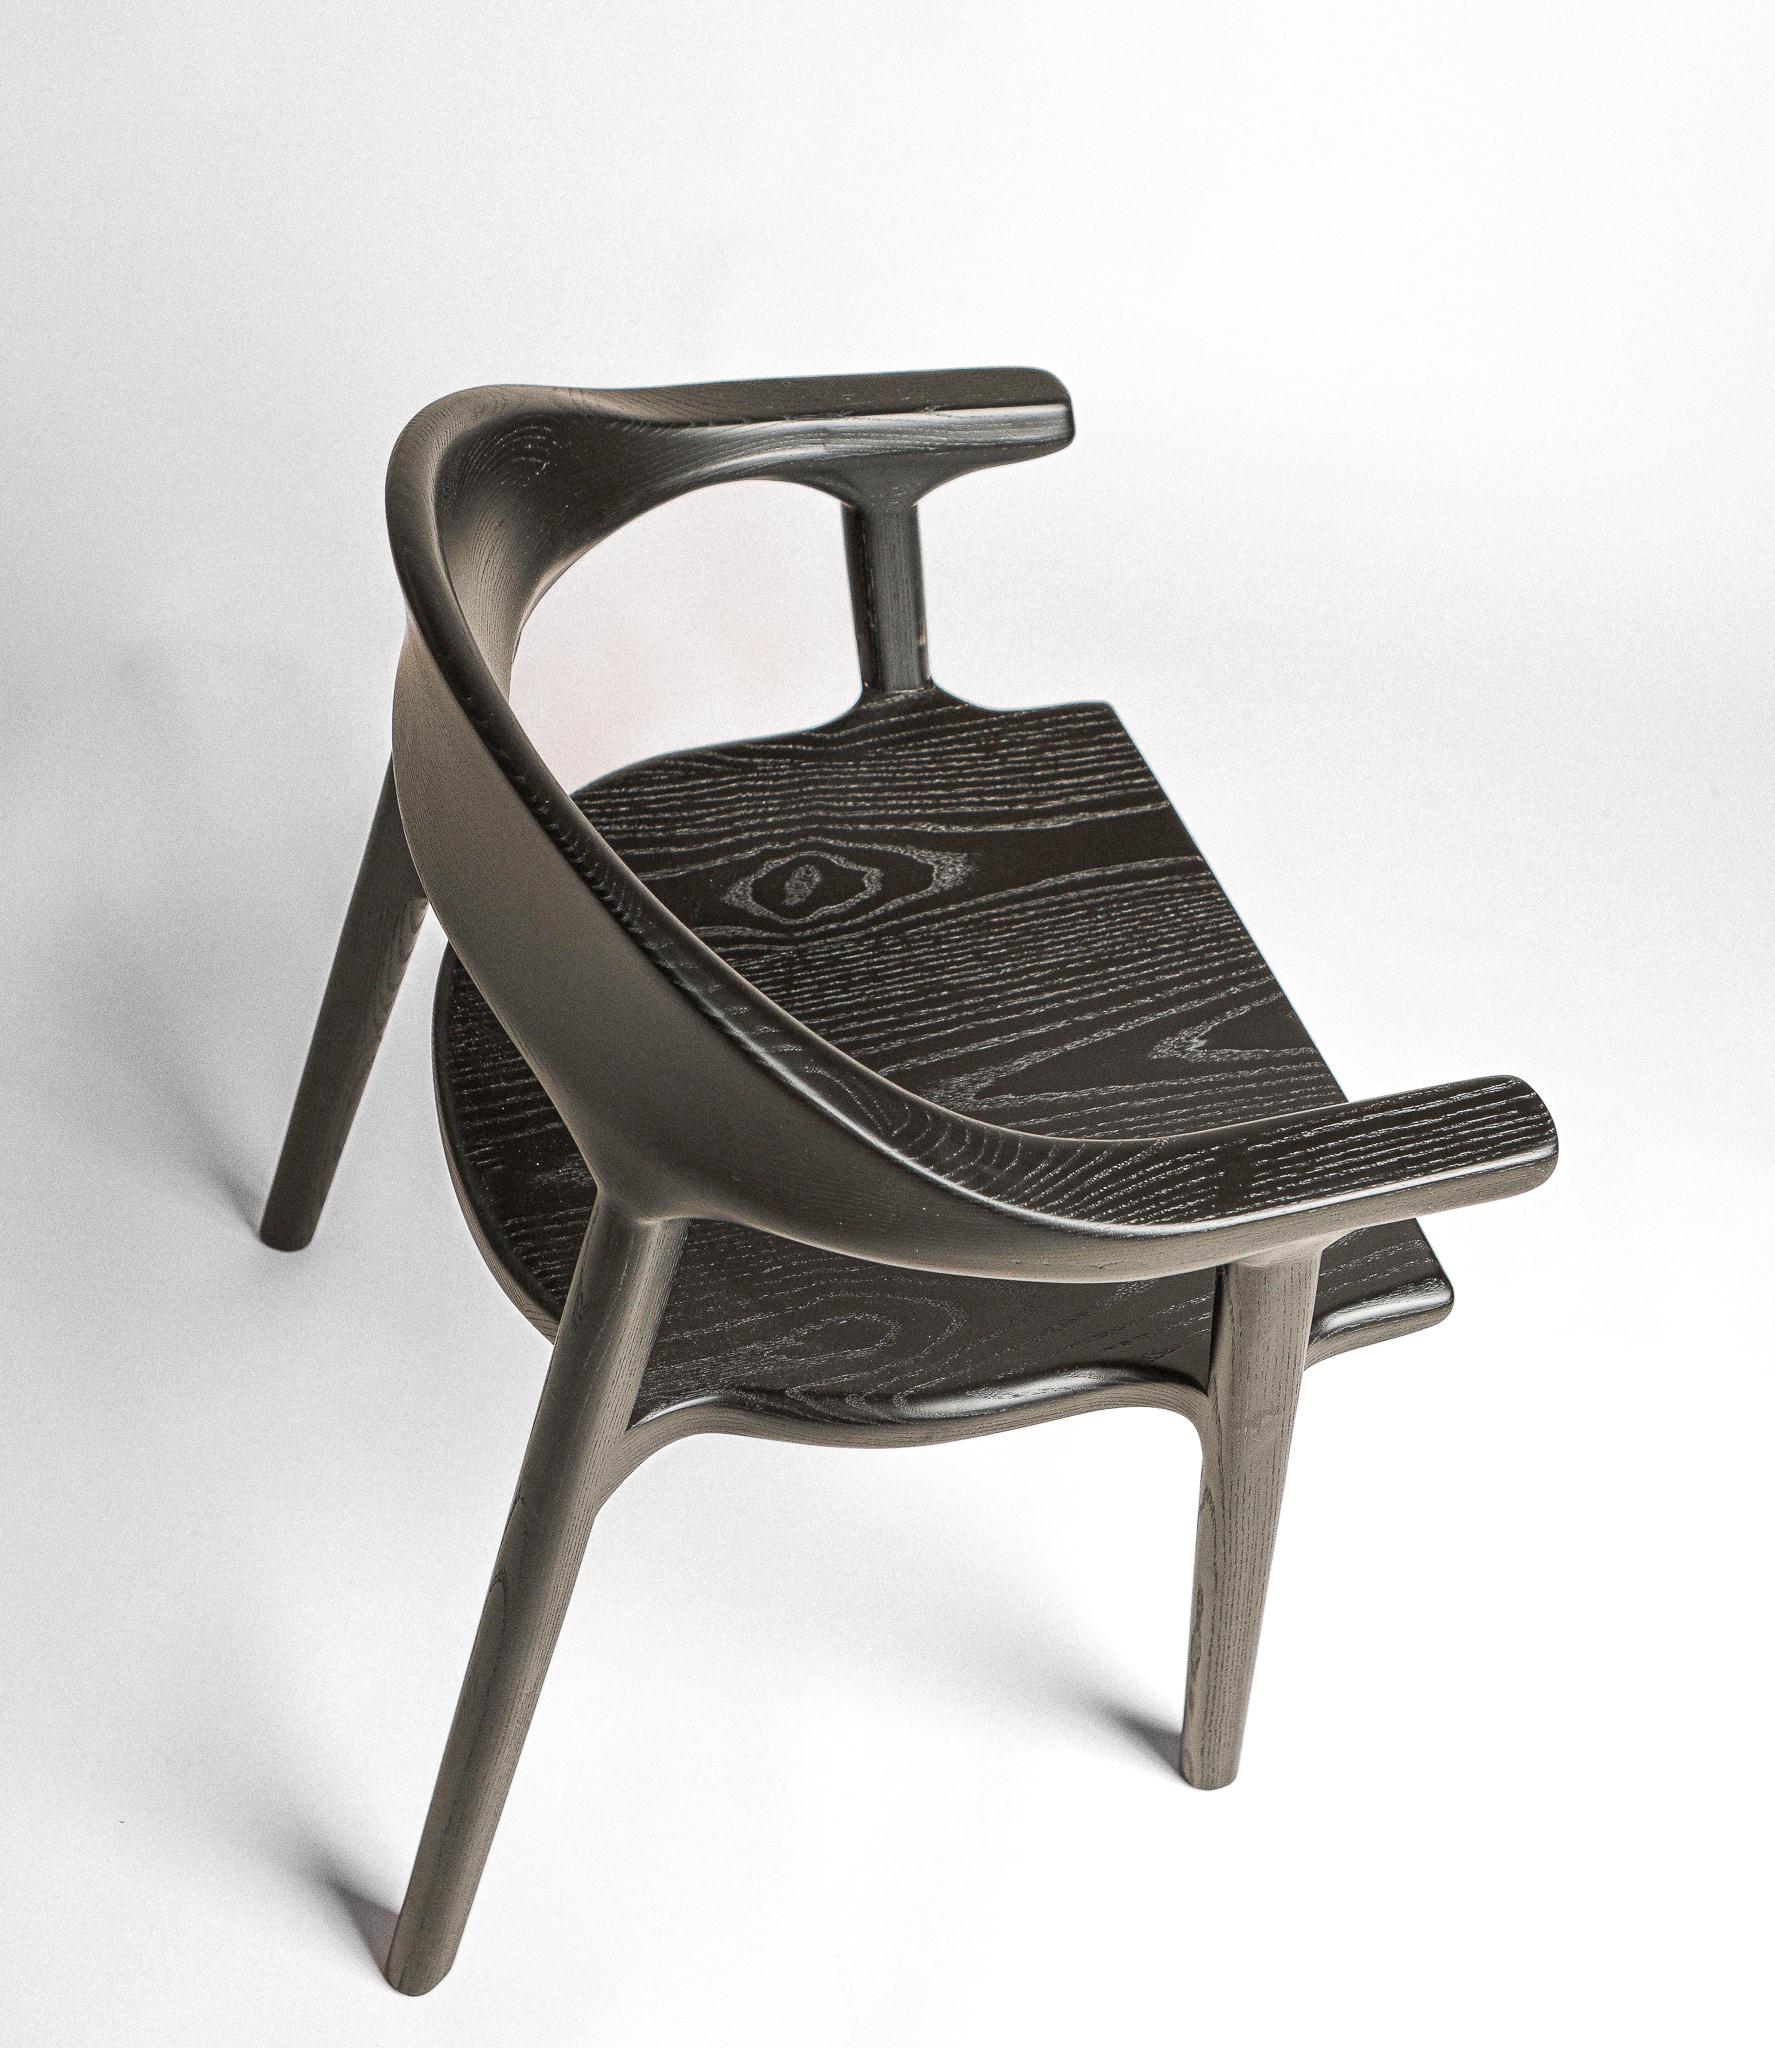 The solid wood Karve chair features soft curves and a contoured backrest exuding comfort and craftsmanship. The blackened finish accentuates the grain of the ash, beautiful from every angle.

Chairs are built to order, bespoke options always